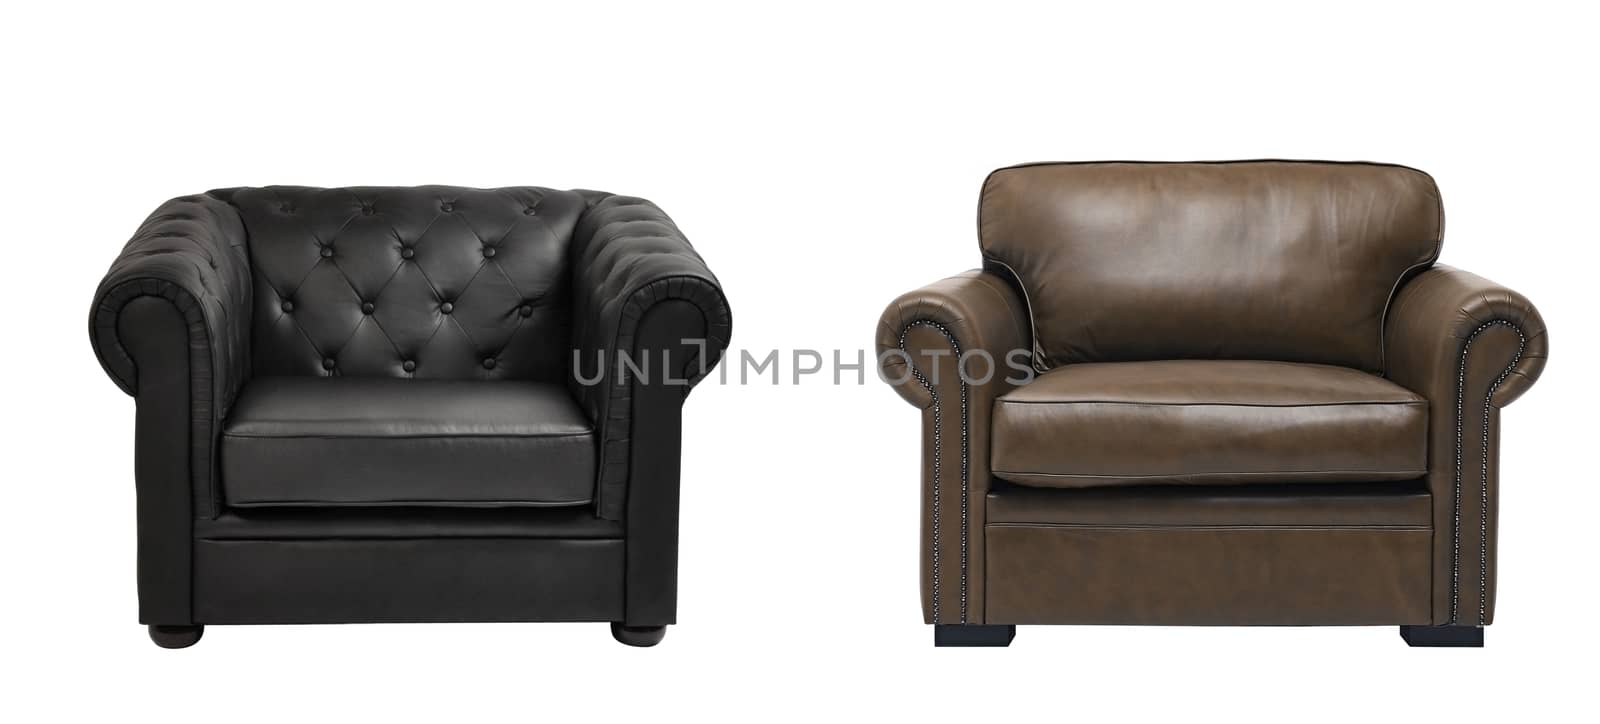 two nice leather arm chairs